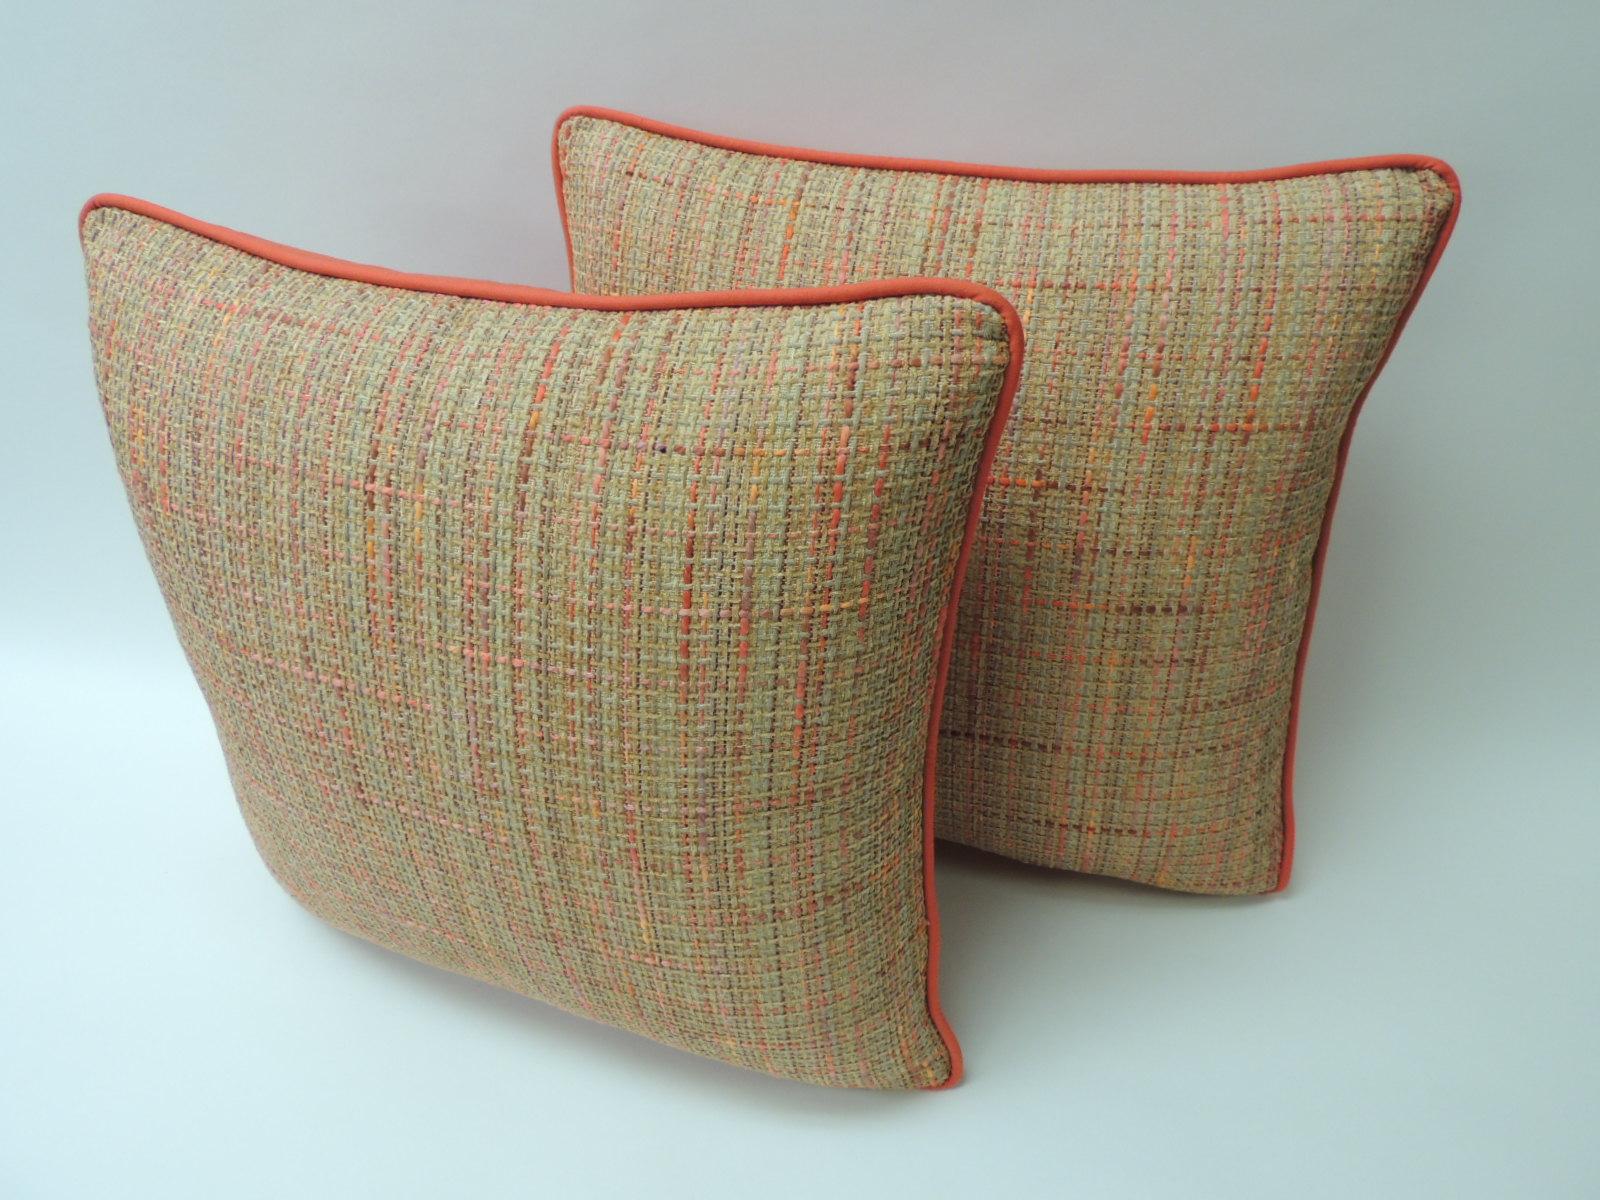 Orange tweet decorative pillow
Orange cotton and linen modern tweet, square throw customizable decorative pillow with bright Palm beach orange solid cotton backing and self-welt. The price on the pillow includes a custom ATG feather/down insert.